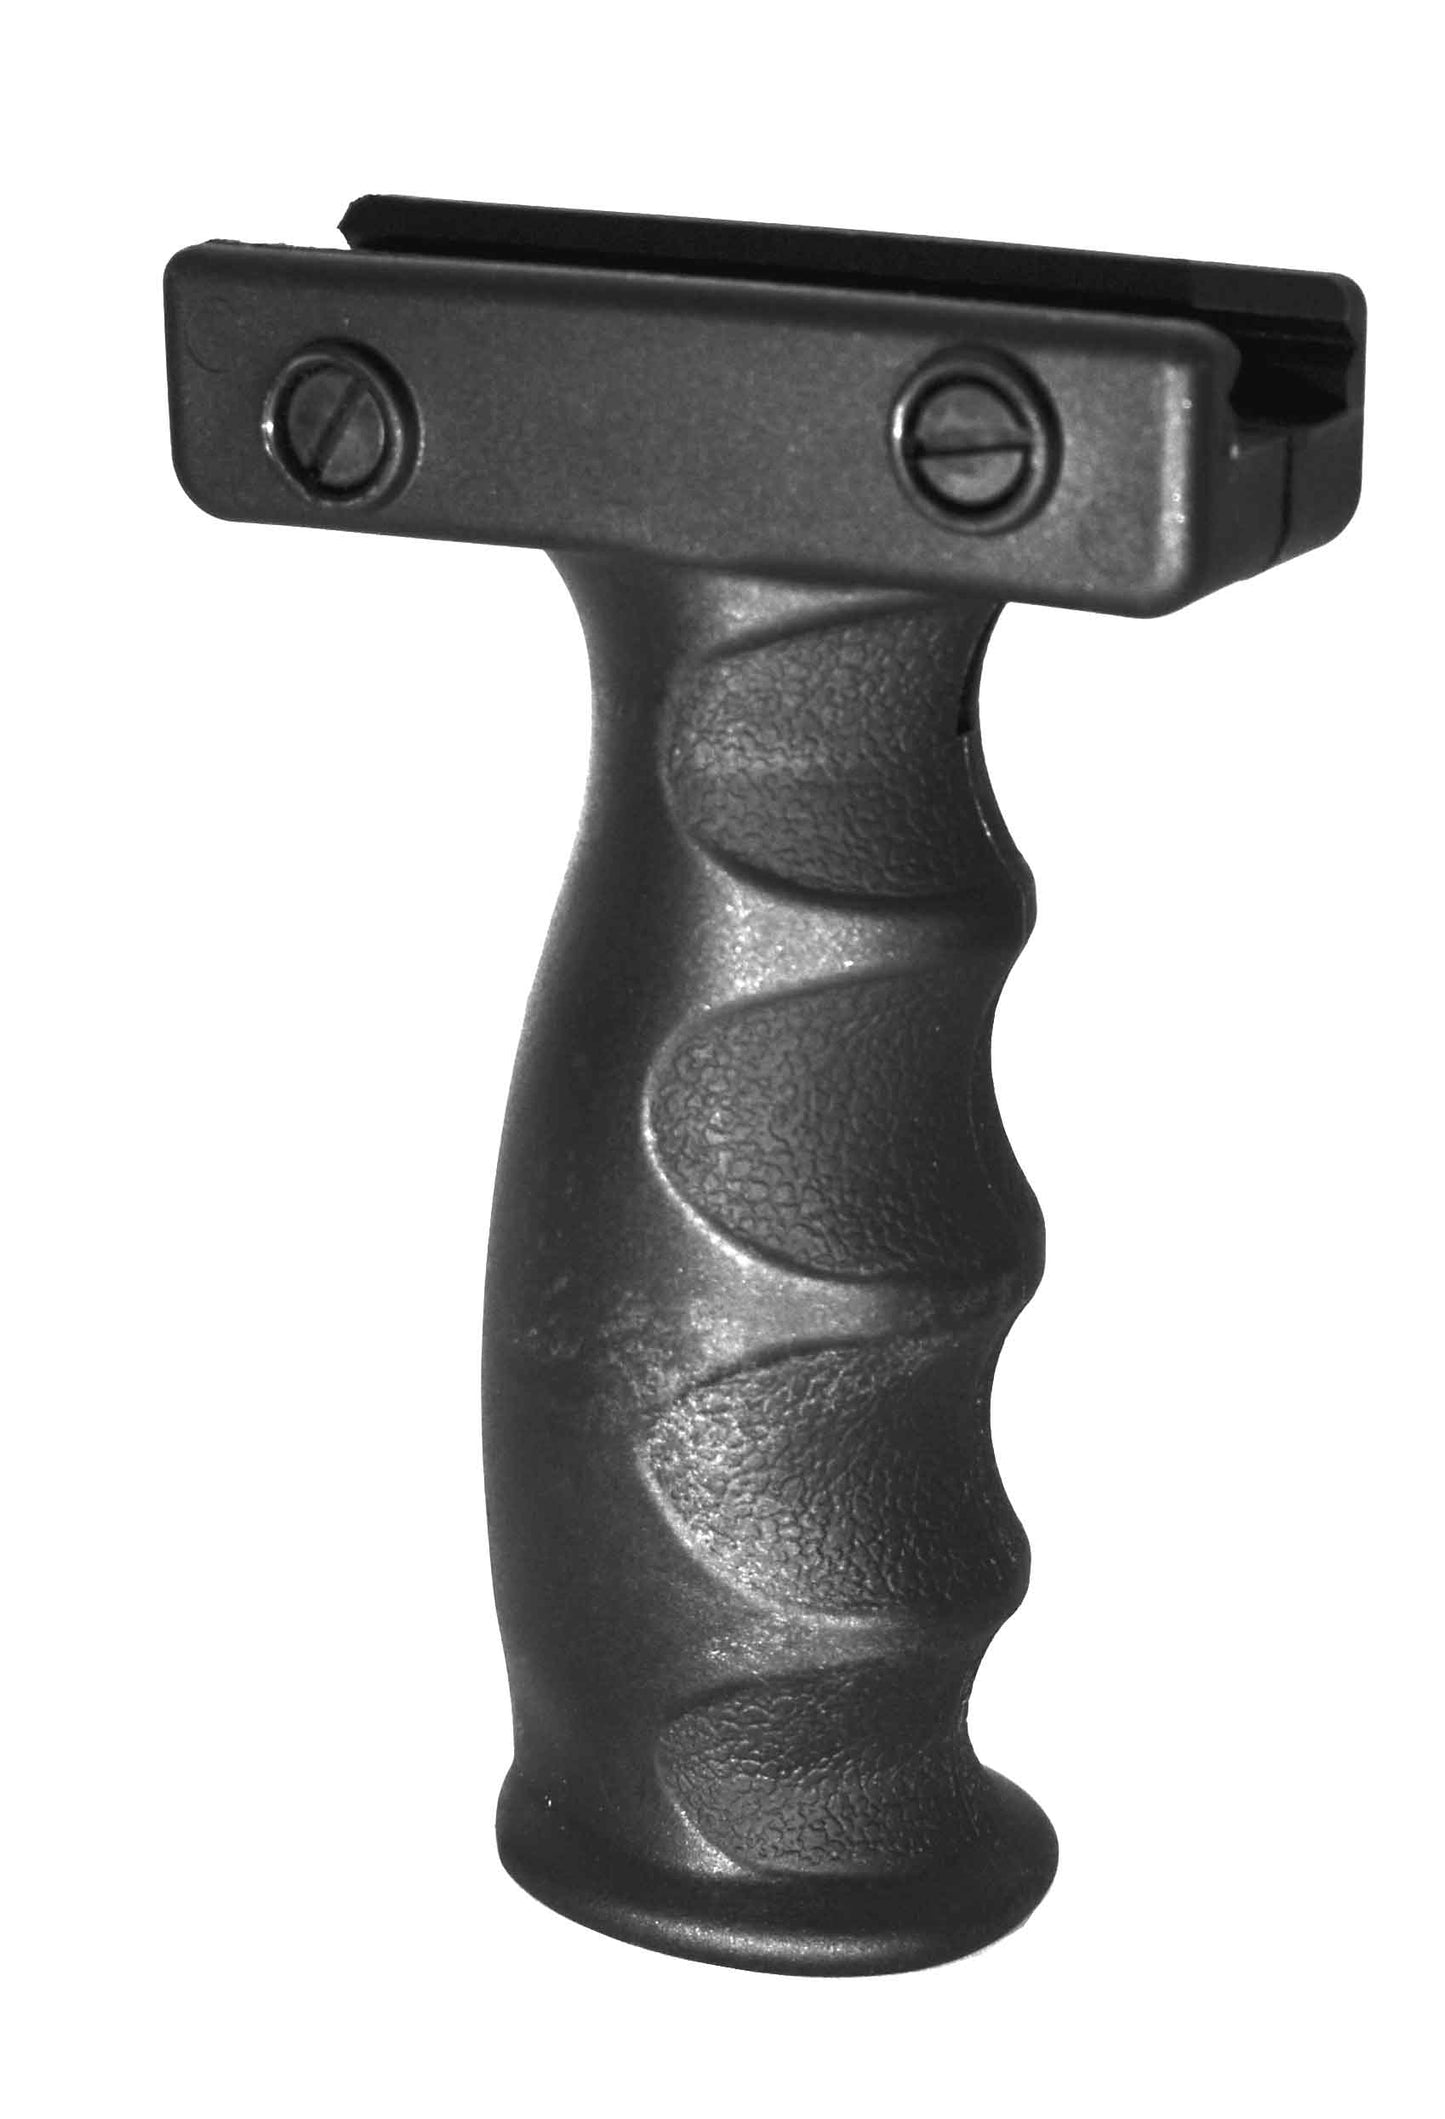 Mossberg 590 12 Gauge forend Pump handguard with side rails and tactical grip black hunting tactical home defense.